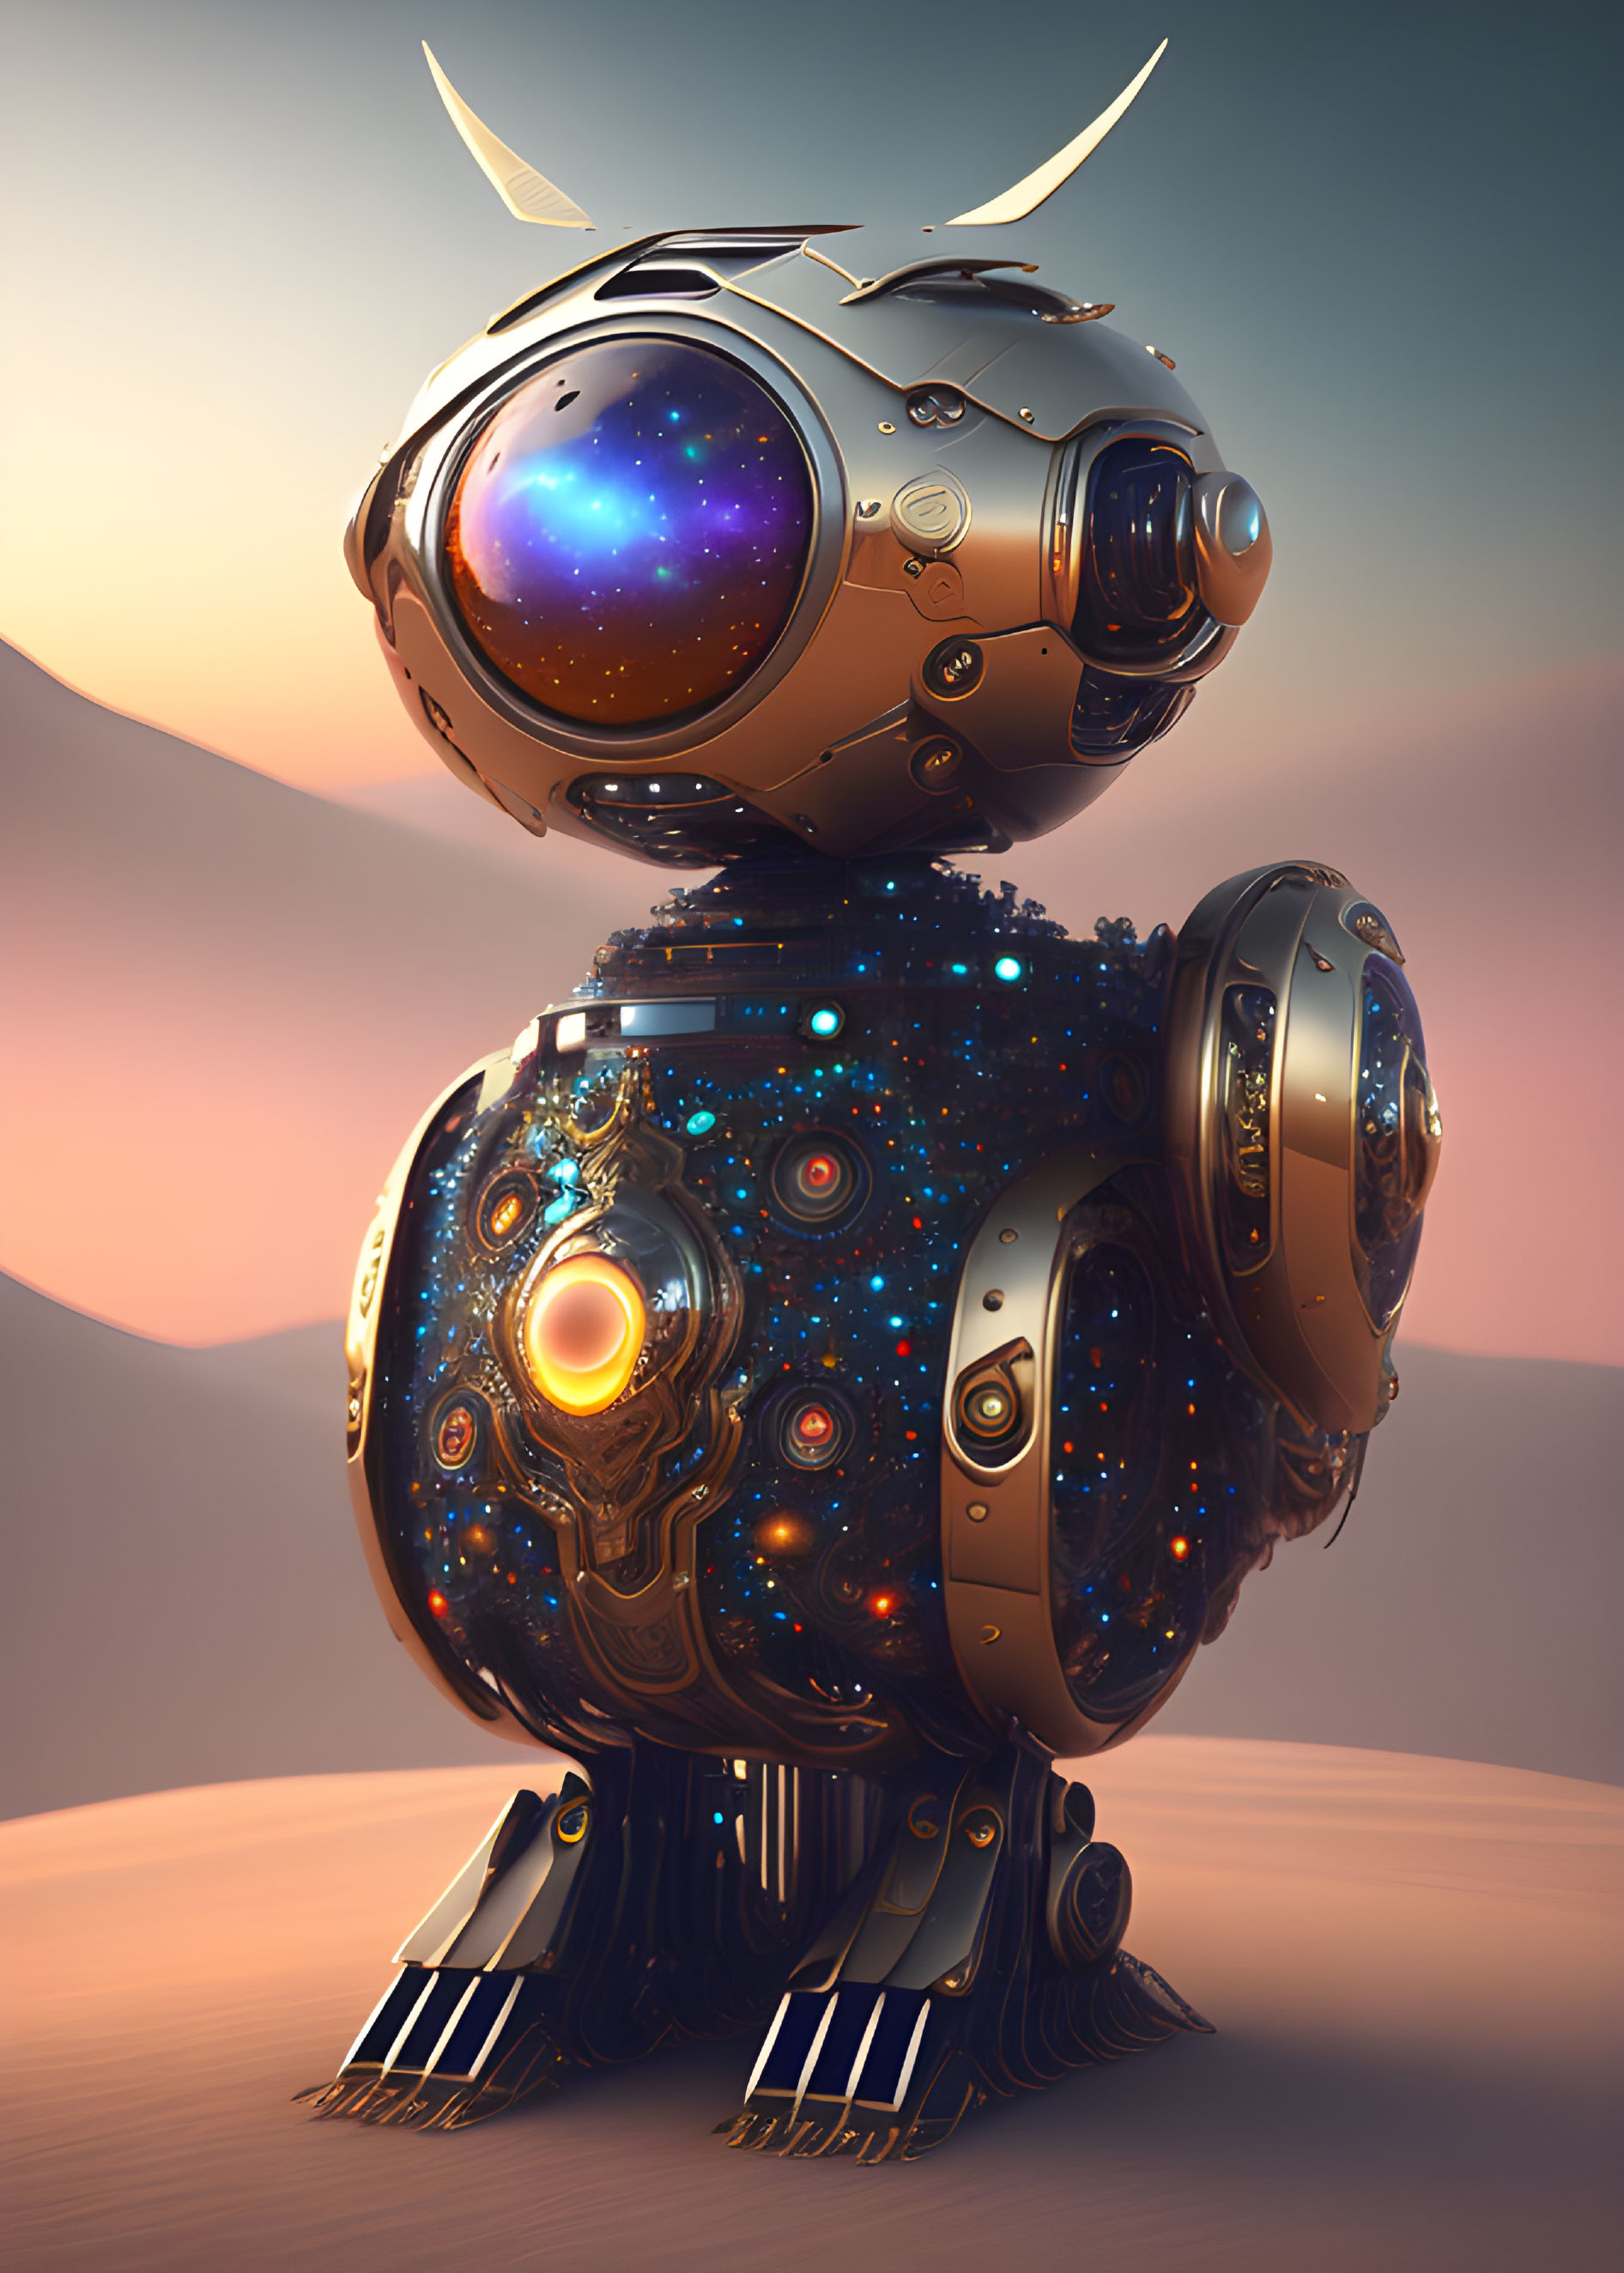 Futuristic spherical robot with cosmic patterns on mechanical feet